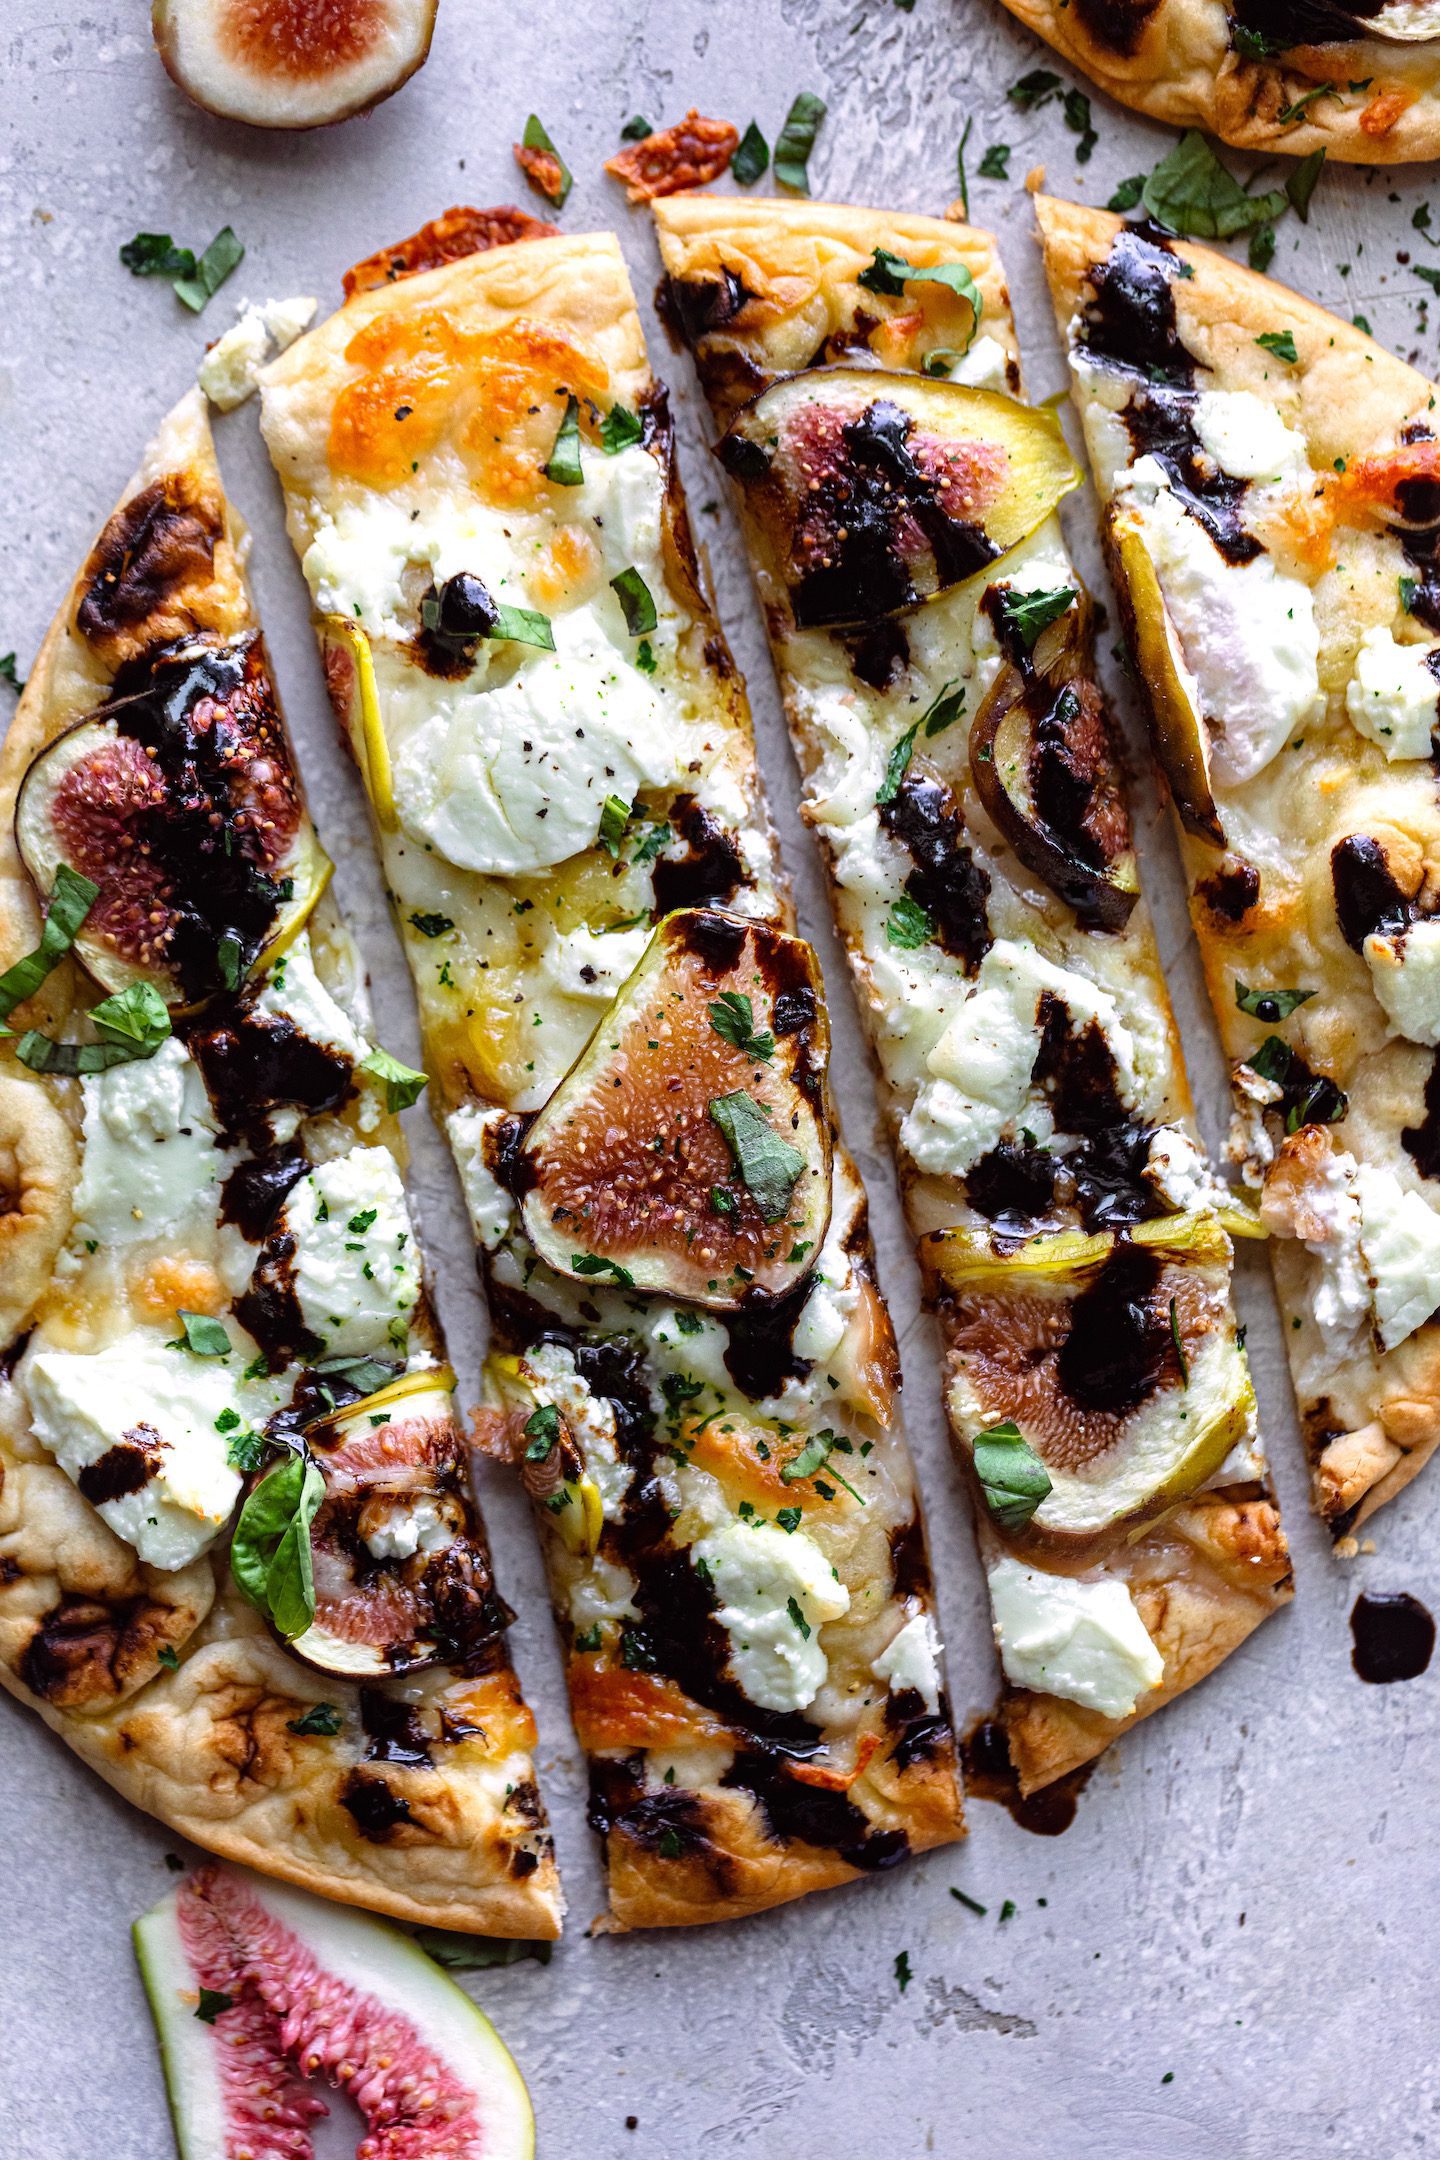 Sweet and savory fig balsamic naan flatbreads with goat cheese, mozzarella, and fresh basil - the perfect summer appetizer!